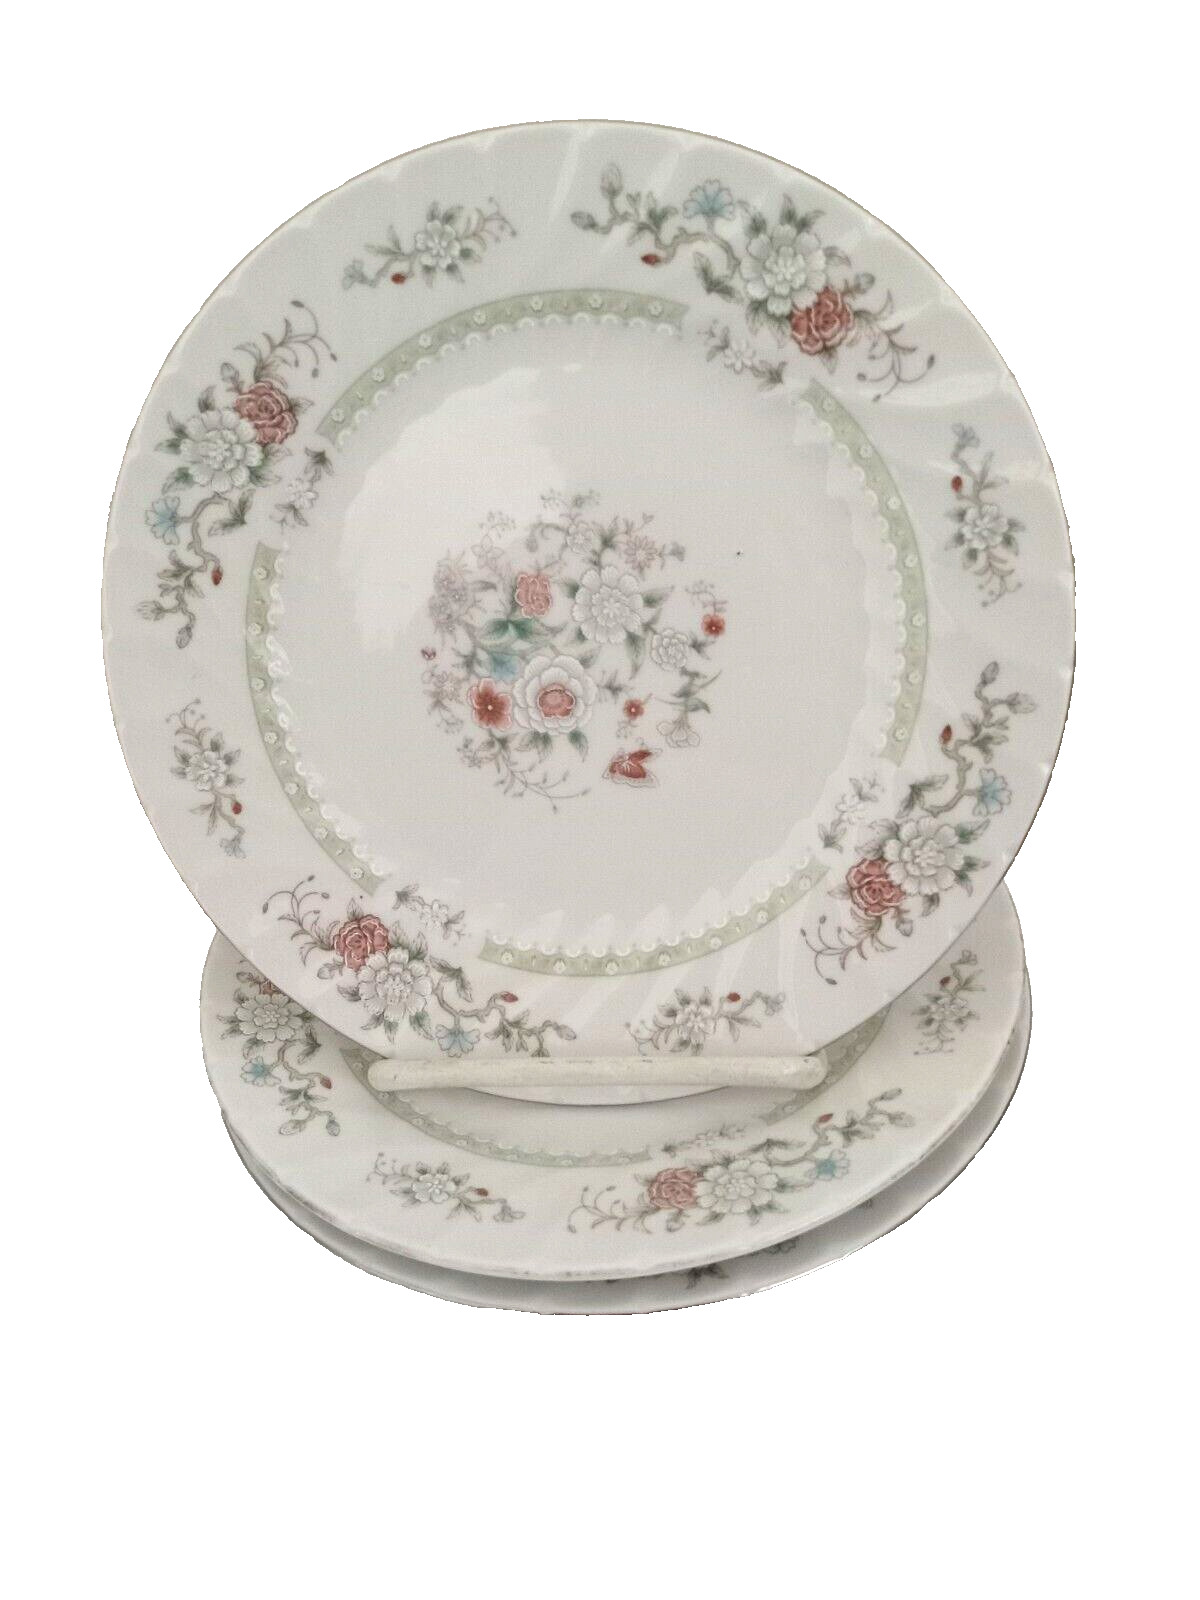 3 RARE H 9 Fine China 中國鮮紅 with Peacocks Seal, Salad or Bread & Butter Plate 7\